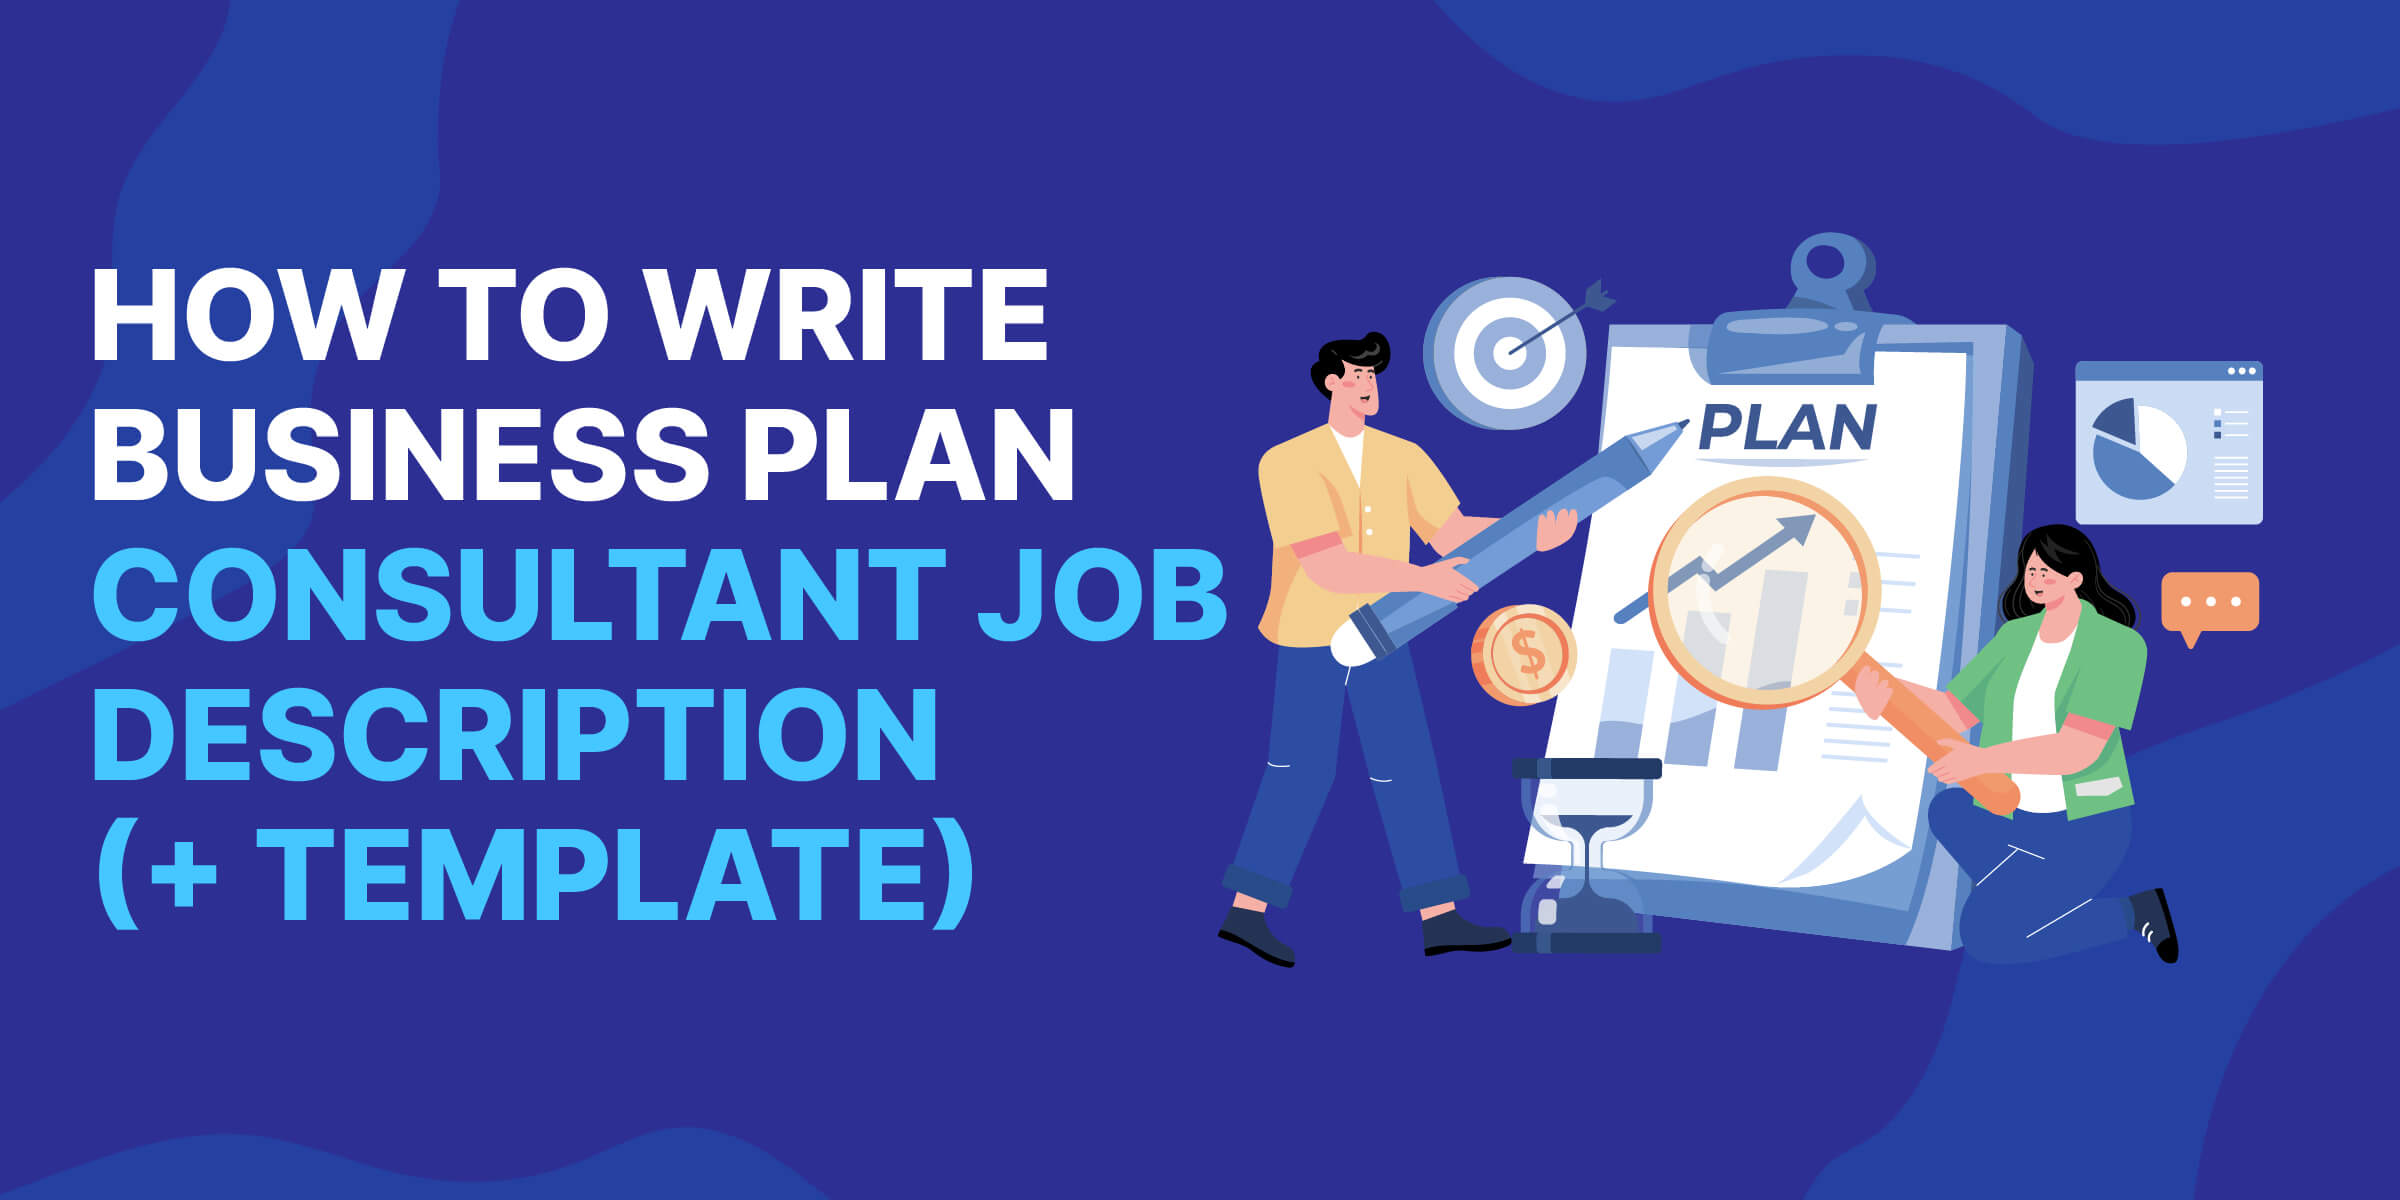 How to Write Business Plan Consultant Job Description and Template